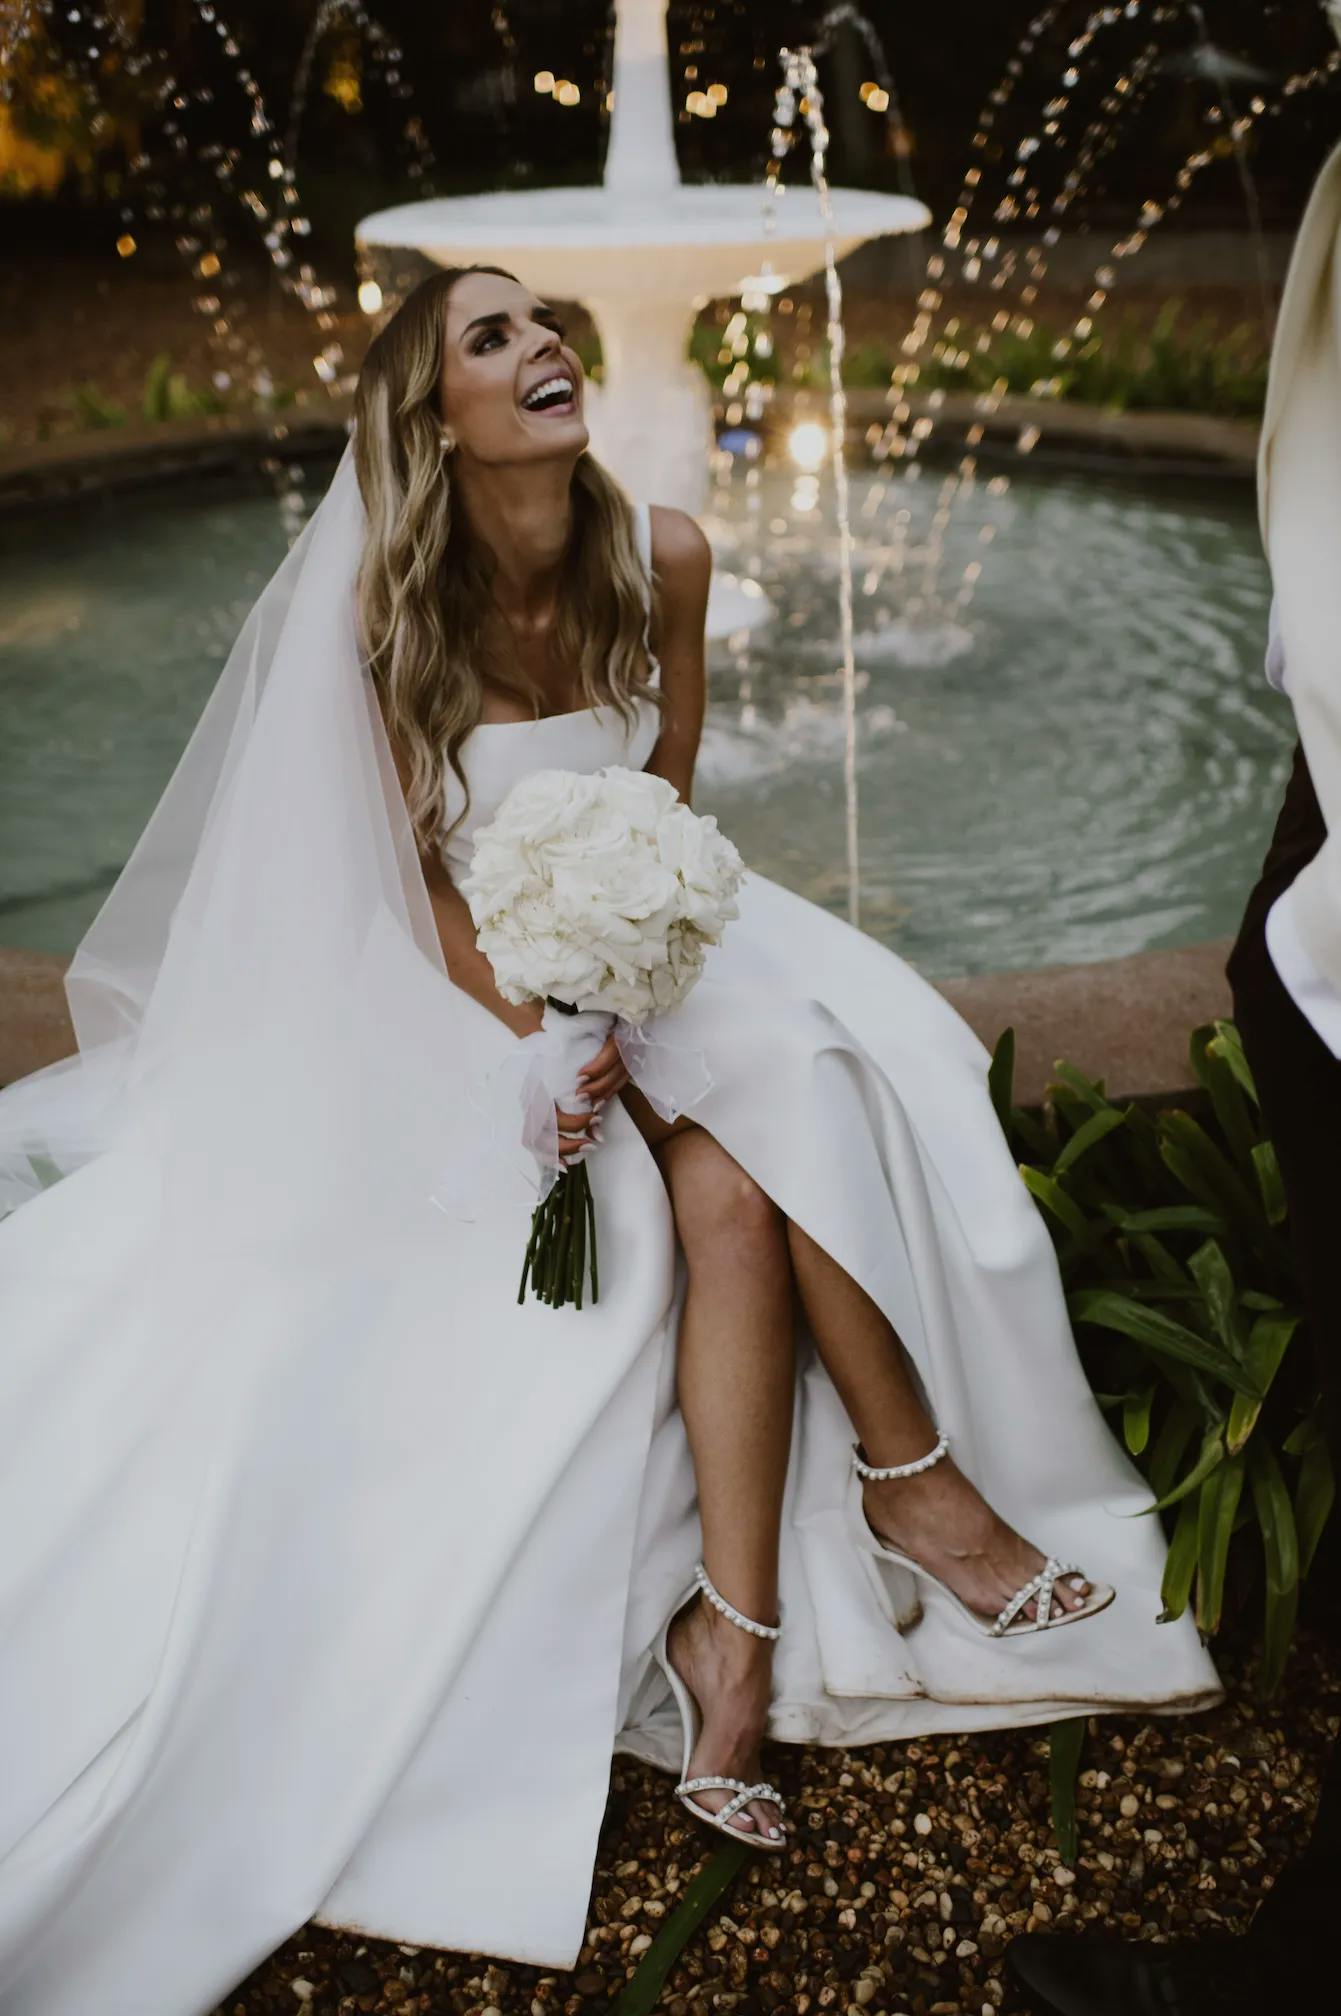 A bride in a white gown and veil sits by a fountain, holding a bouquet of white flowers. She smiles joyfully while wearing strappy heels decorated with pearls. The background features water spraying from the fountain and lush greenery.